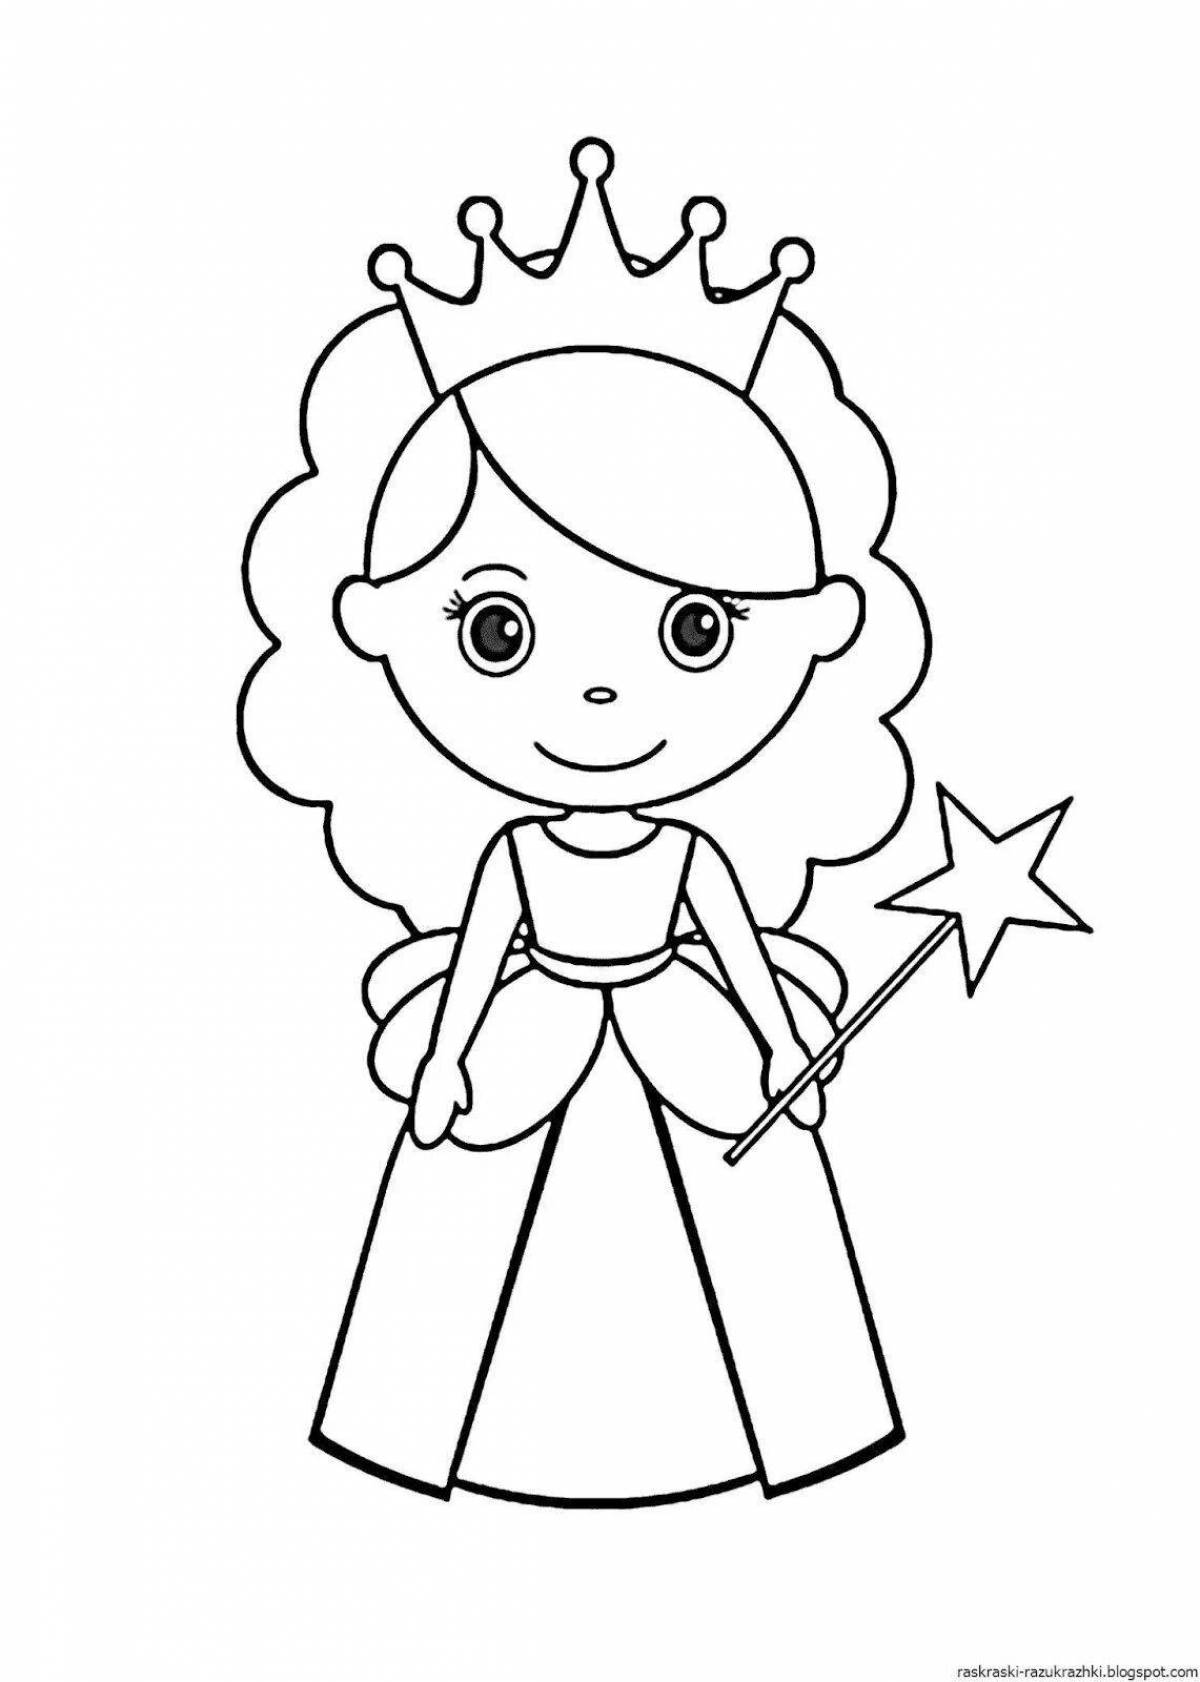 Violent coloring for girls 3 years, princess